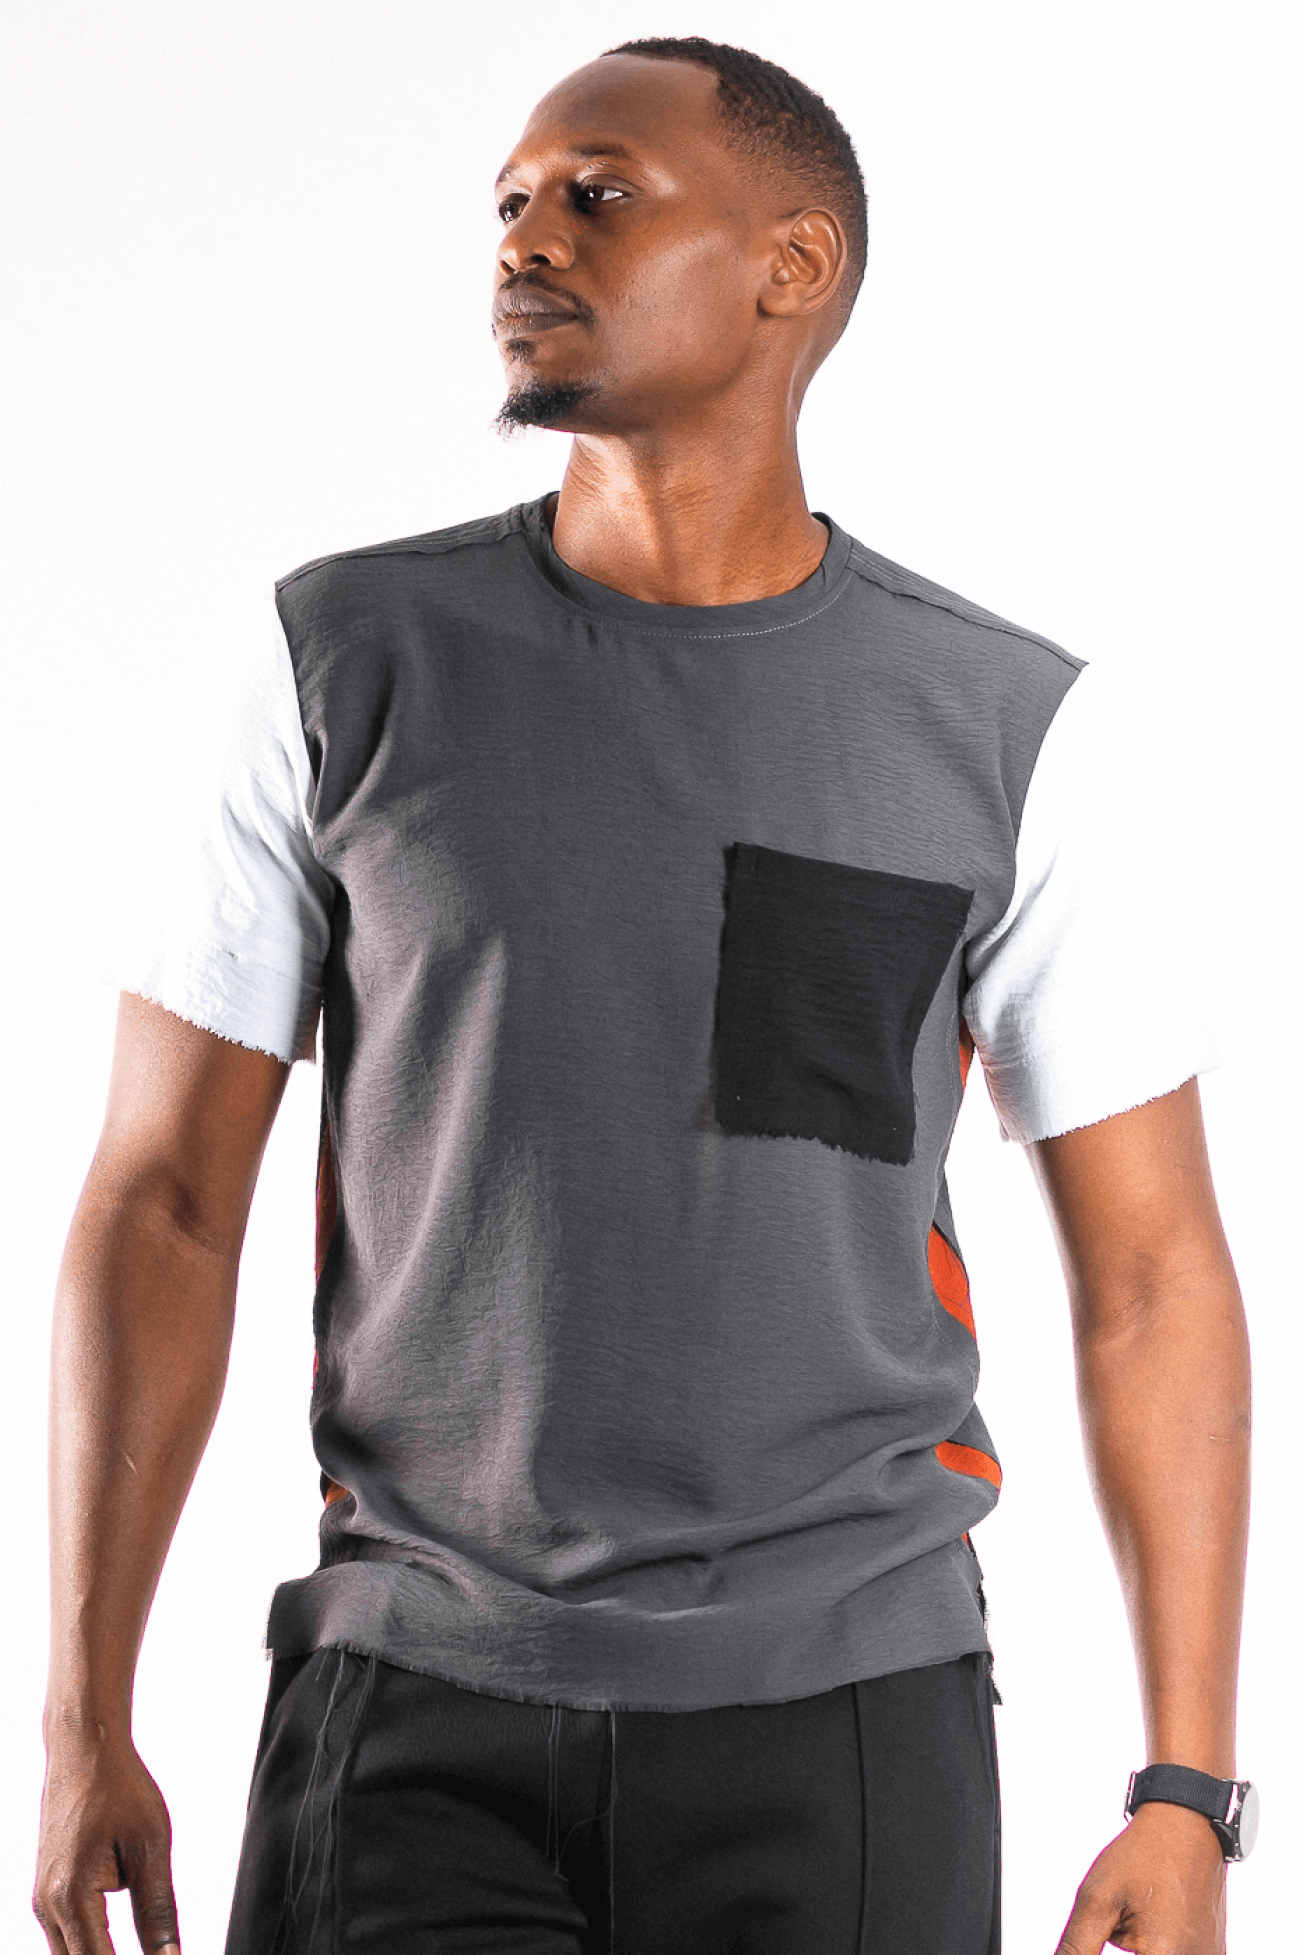 Unfinished Classic NC T-Shirt - Tops by NC Nairobi. Shop on Arrai now! Stand out in style with our classic and smart short-sleeved Men's T-Shirt. Made from textured viscose, this shirt features a unique blend of NC Nairobi classic colours, unfinished edge